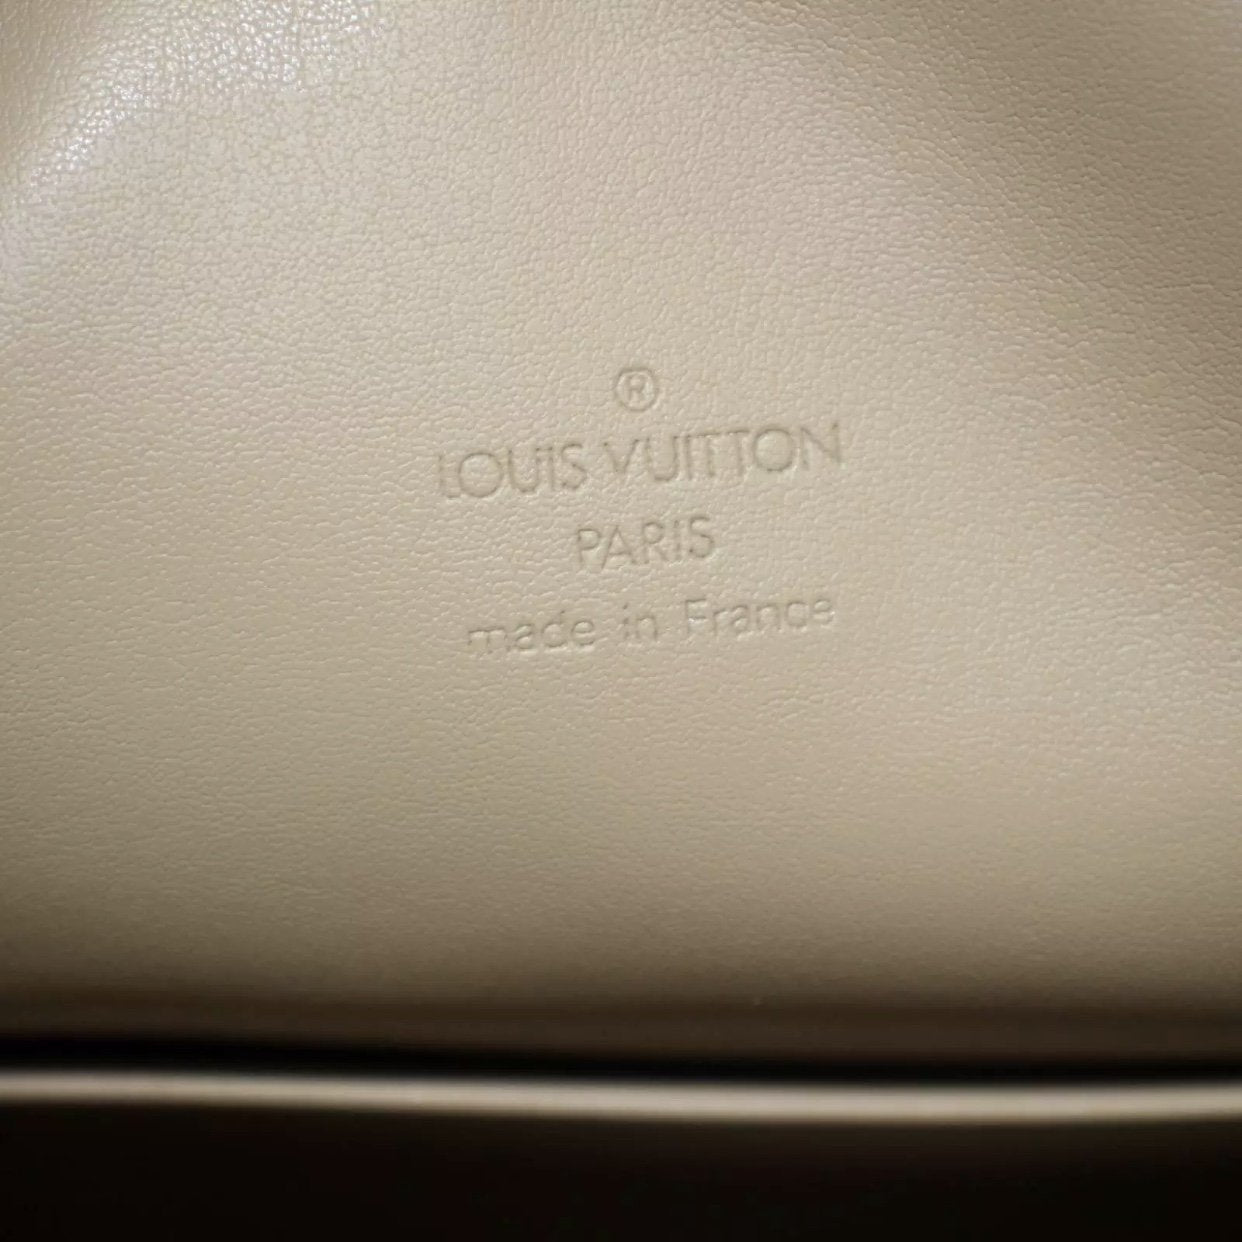 Tompkins square handbag Louis Vuitton Gold in Synthetic - 22430249